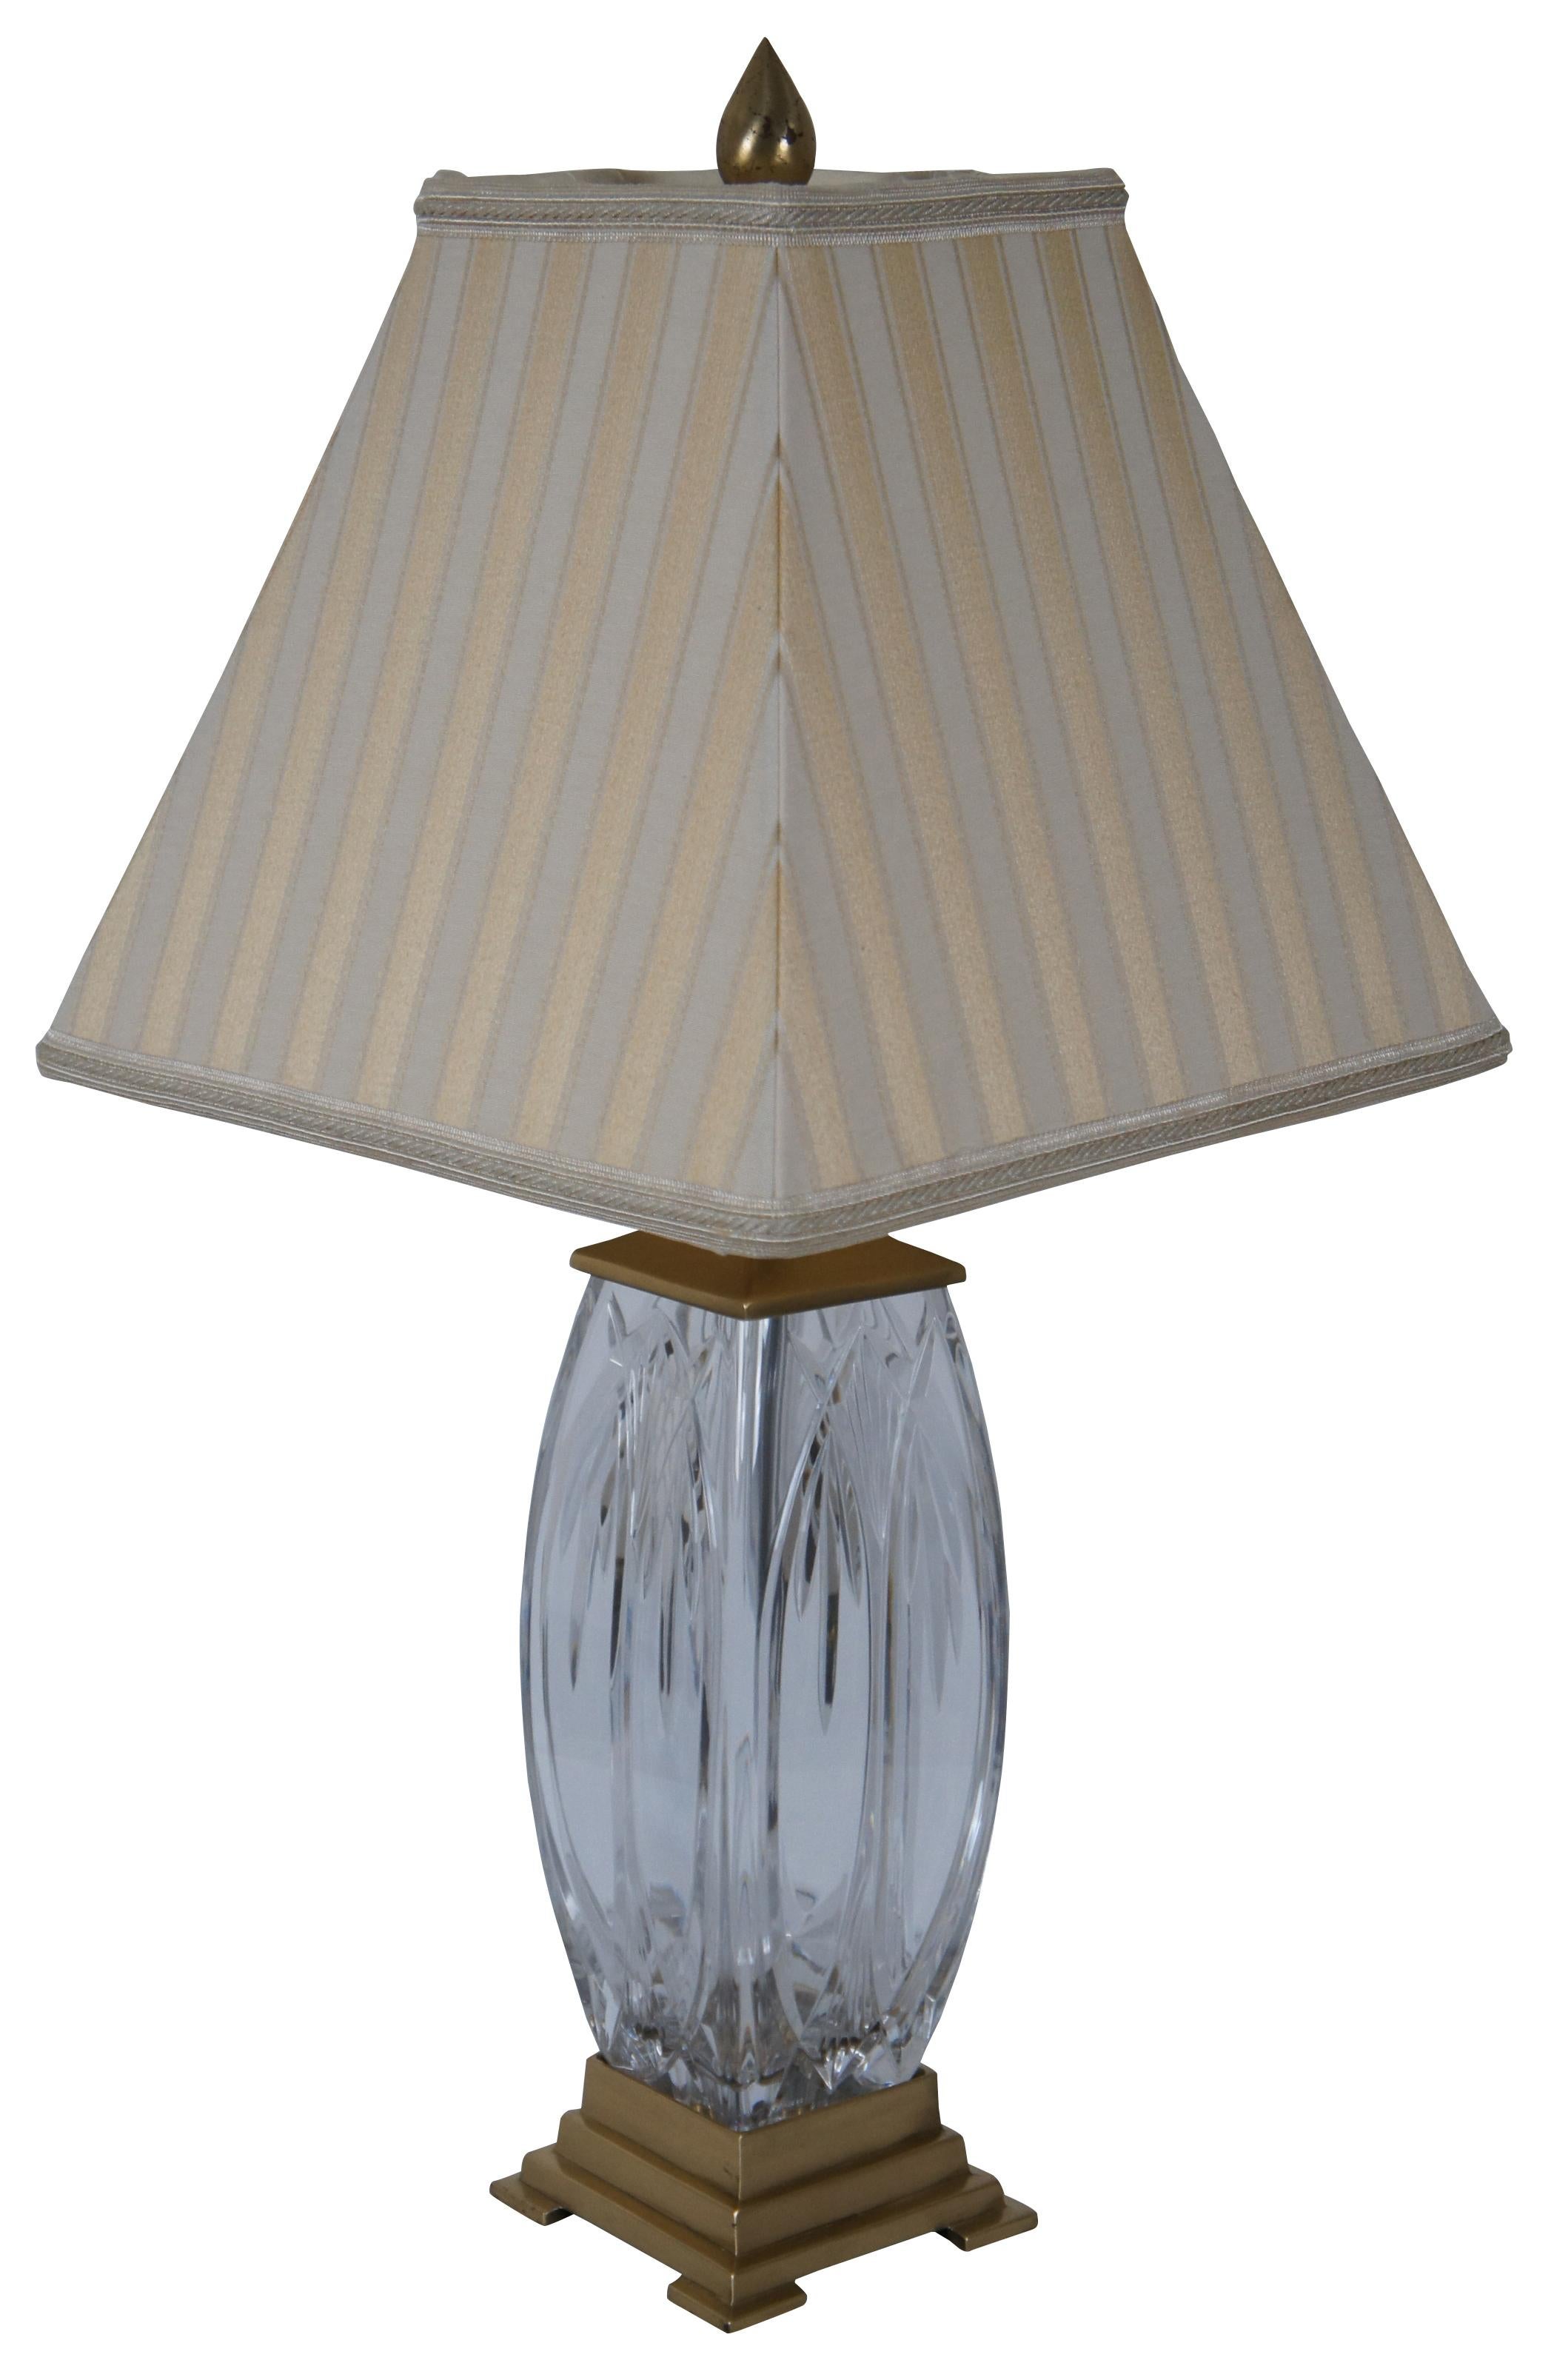 Waterford Finn cut crystal and Versailles brass table lamp with striped silk shade. 108-892-19-00

Measures: 4.75” x 4.75” x 18” / shade - 12.25” x 12.25” x 10.5” / height to top of finial – 26” (width x depth x height).